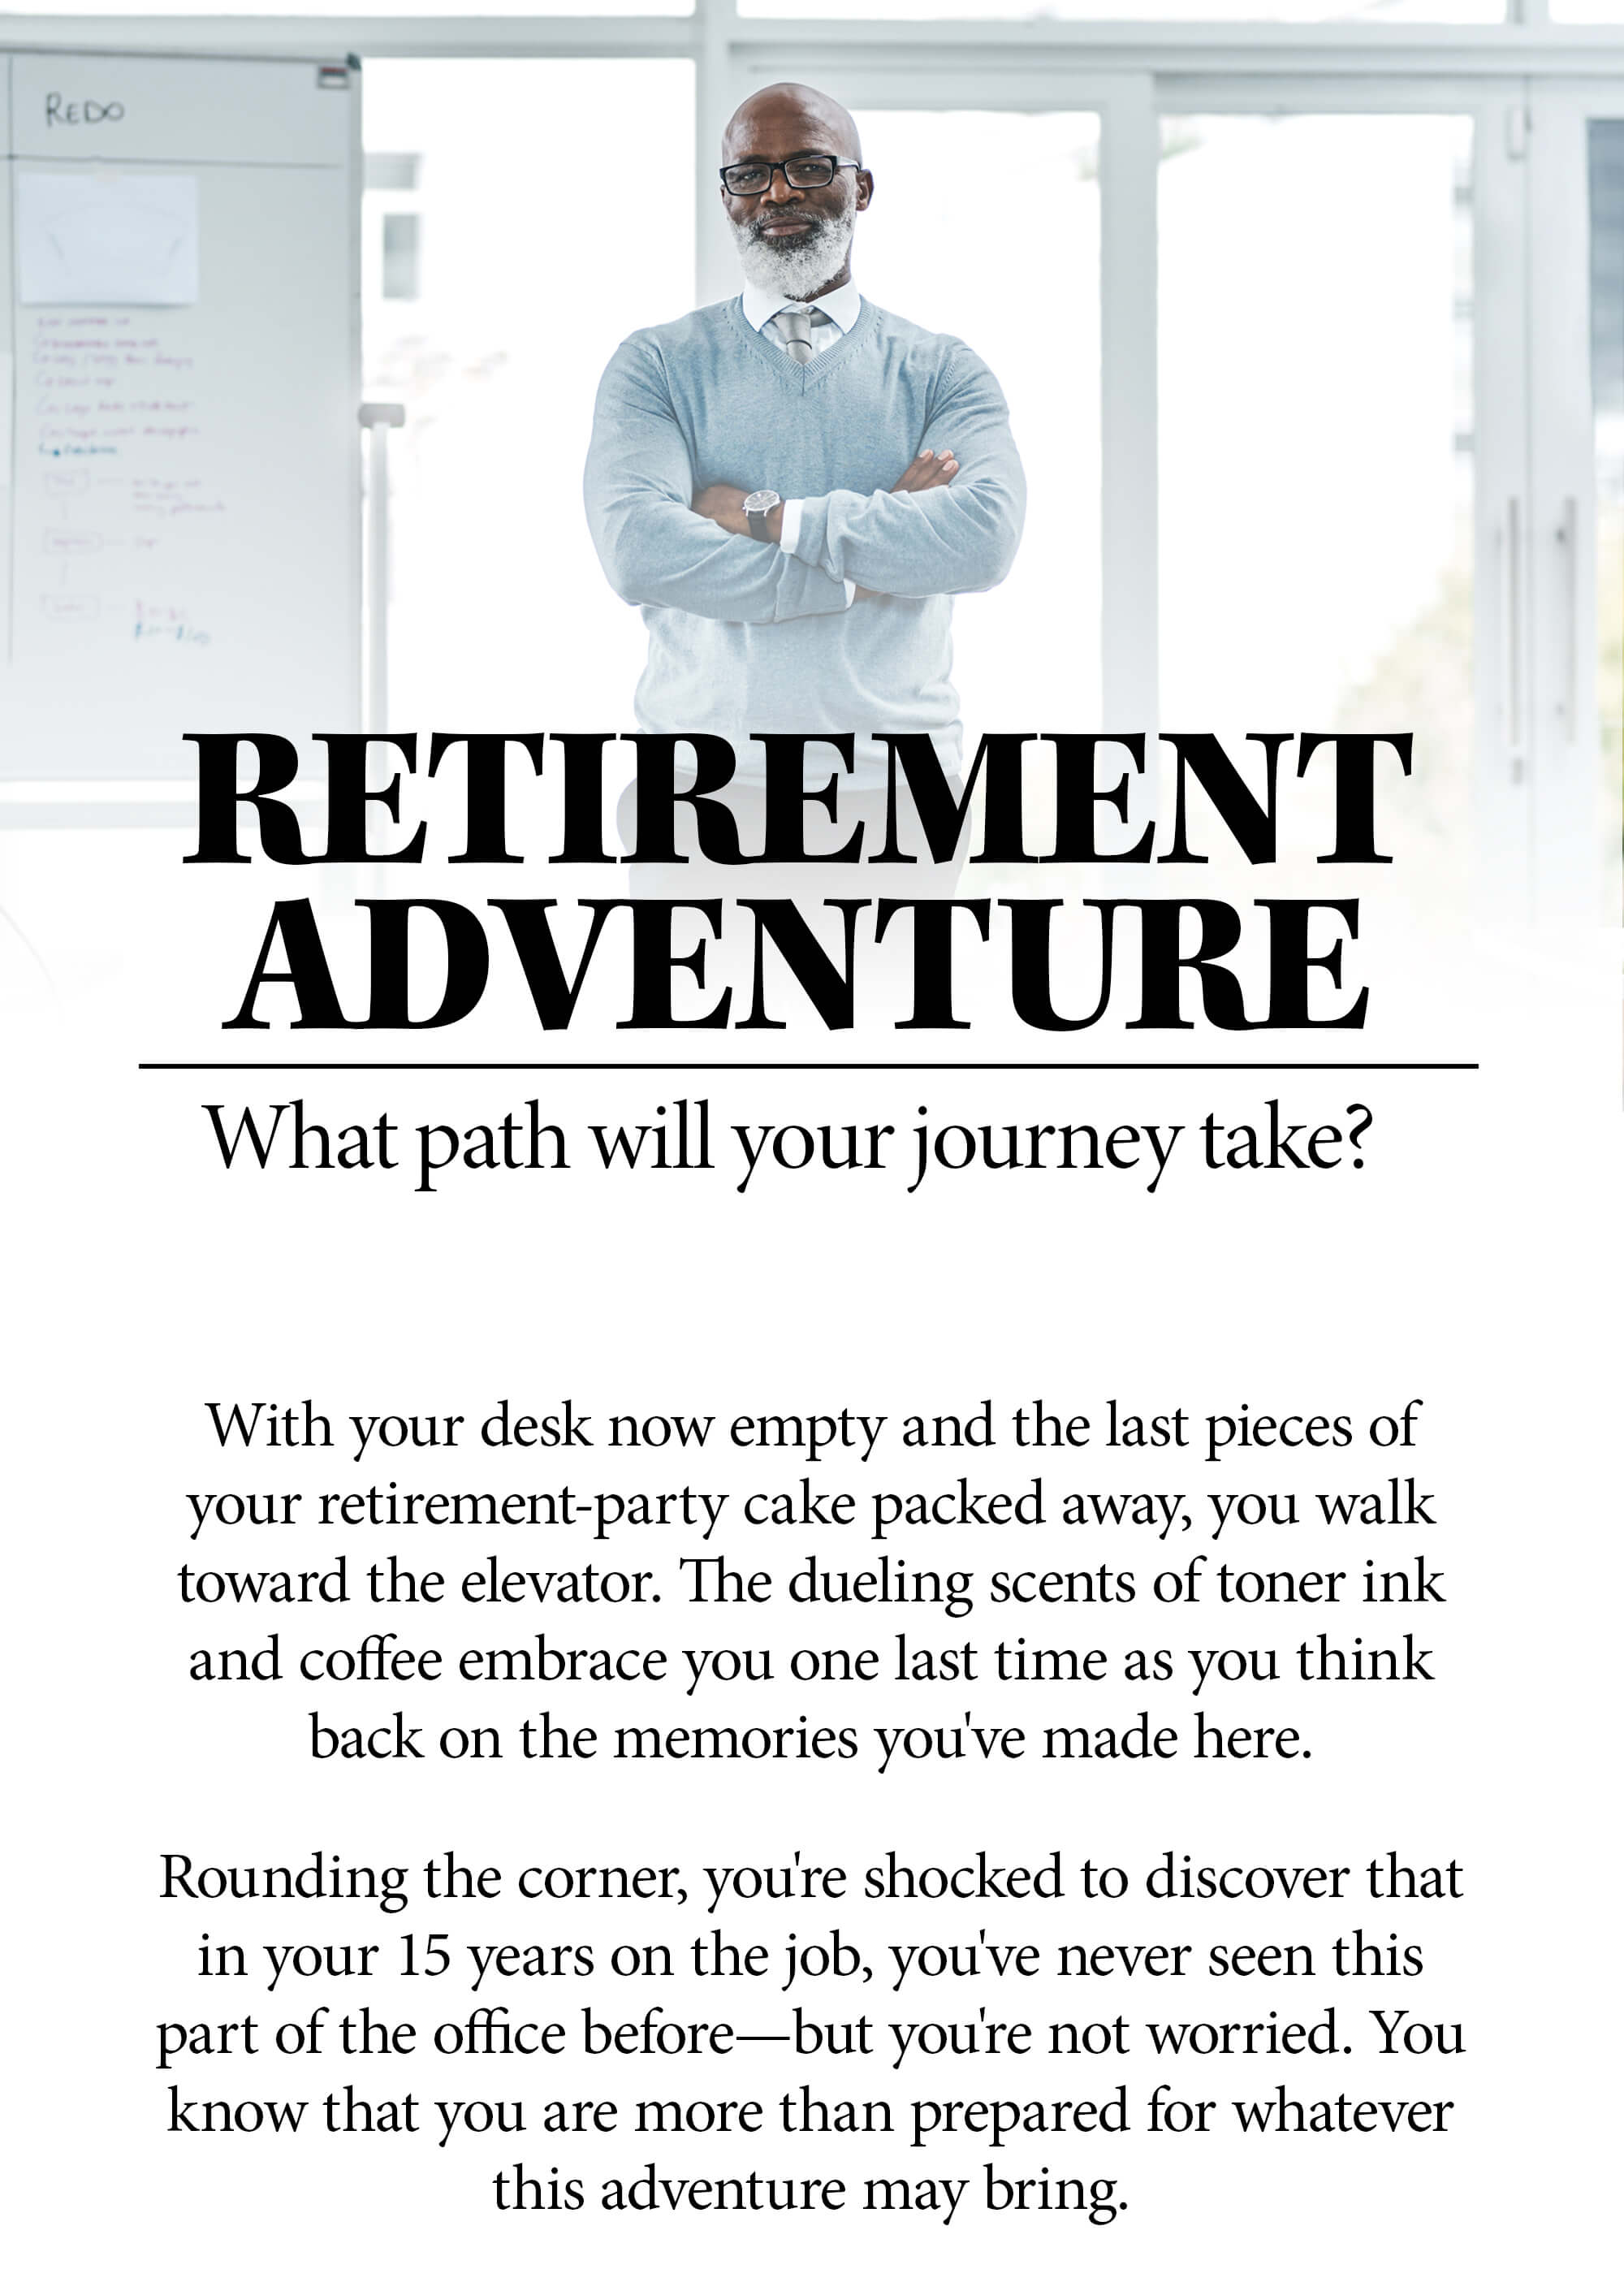 Choose Your Own Retirement Adventure. Which path will your journey take? With your desk now empty and the last pieces of your retirement-party cake packed away, you walk toward the elevator. The dueling scents of toner ink and coffee embrace you one last time as you think back on the memories you've made here. Rounding the corner, you're shocked to discover that in your 15 years on the job, you've never seen this part of the office before—but you're not worried. You know that you are more than prepared for whatever this adventure may bring.